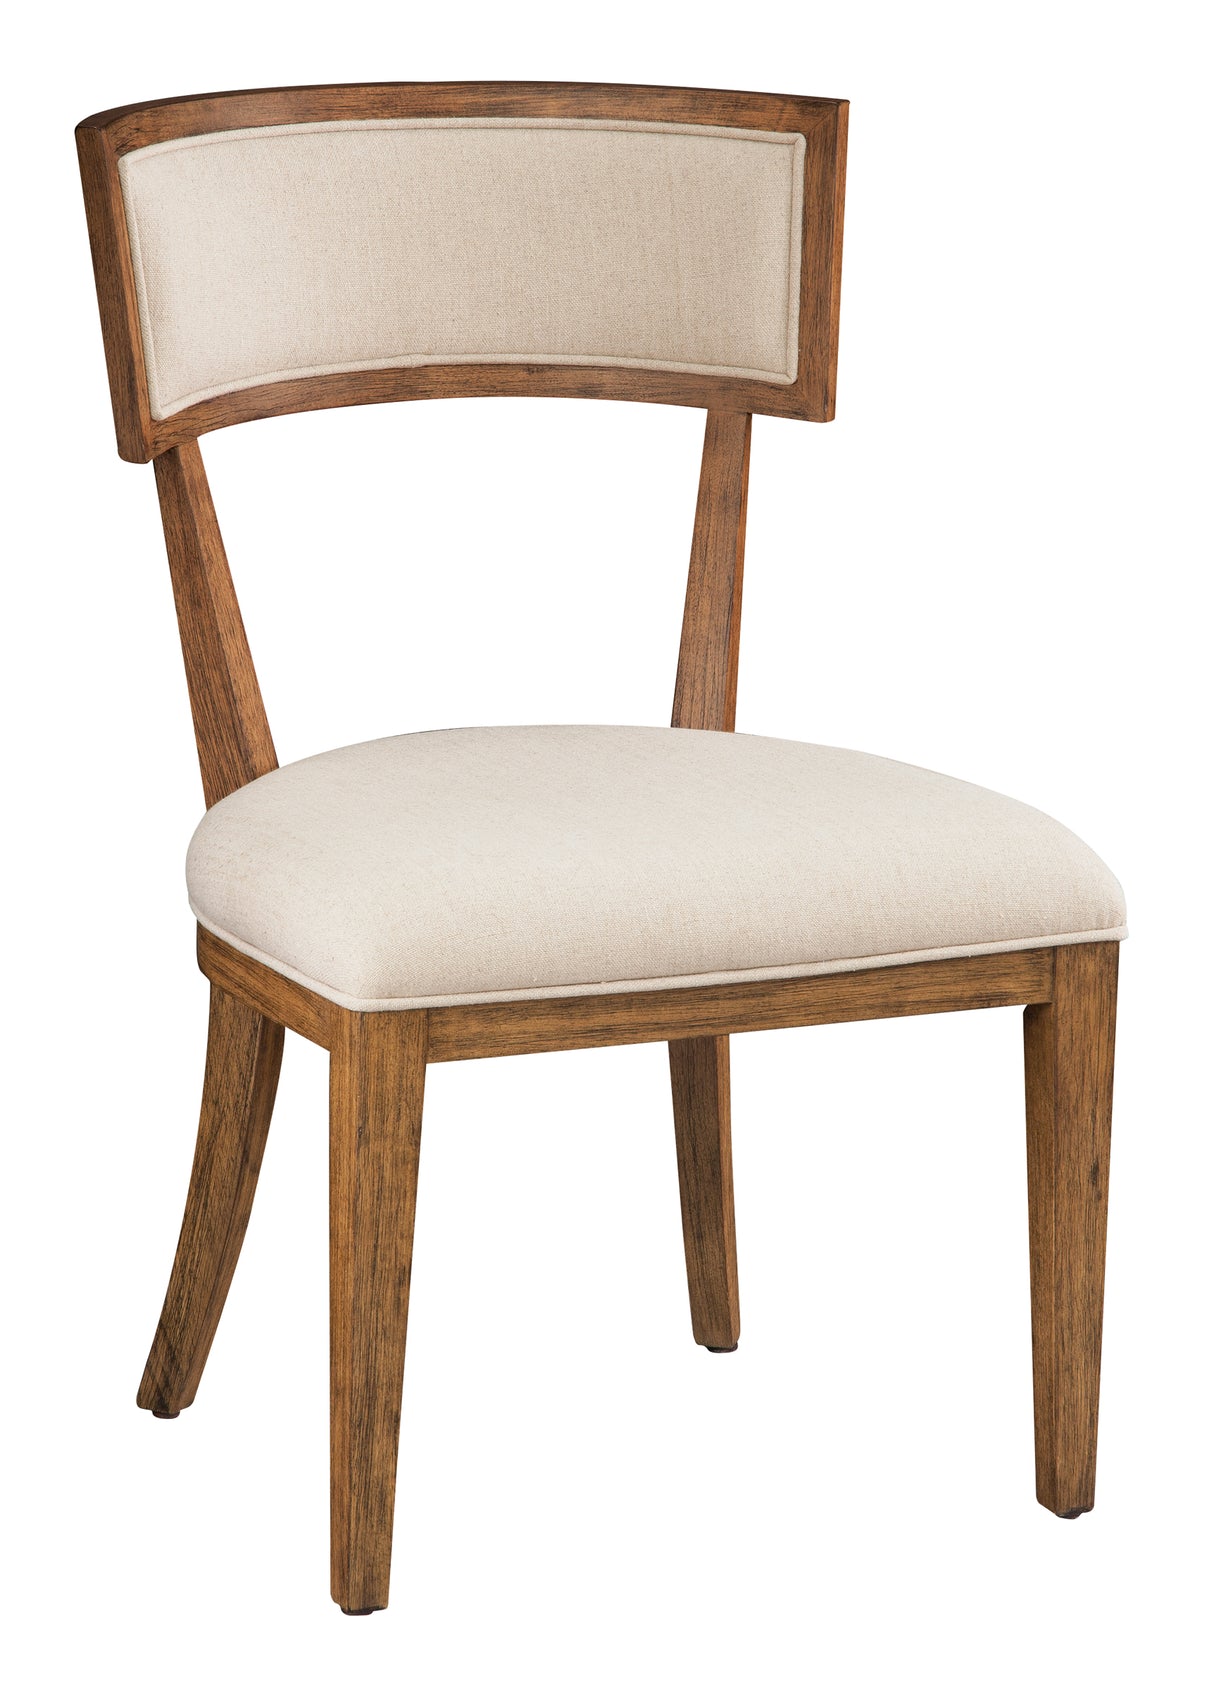 Hekman 23723 Bedford Park 22in. x 24in. x 36in. Dining Side Chair